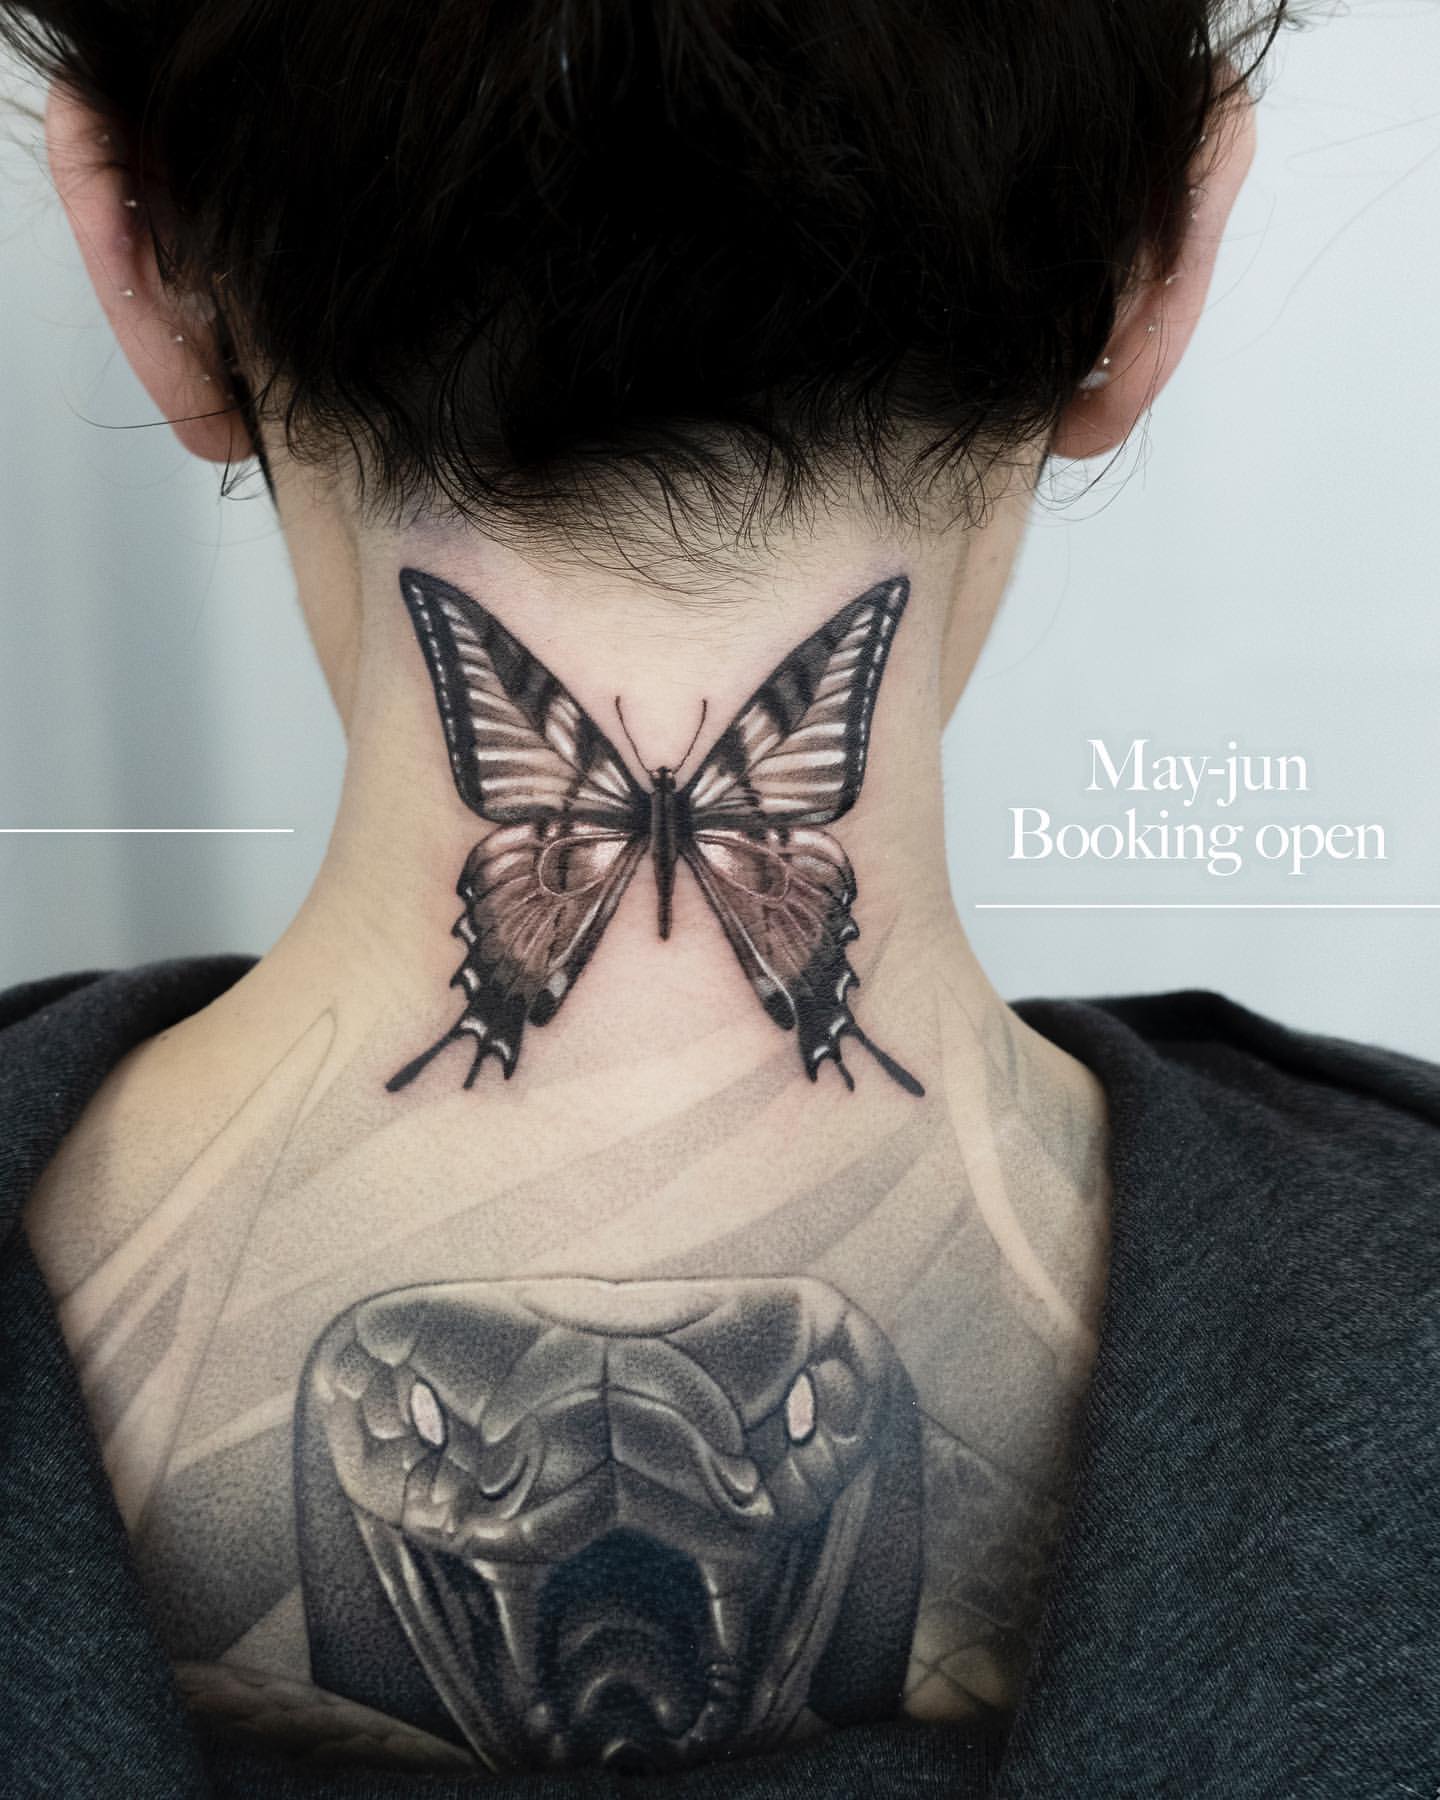 Mens Hairstyles Now  Neck tattoo for guys Butterfly neck tattoo Back of neck  tattoo men